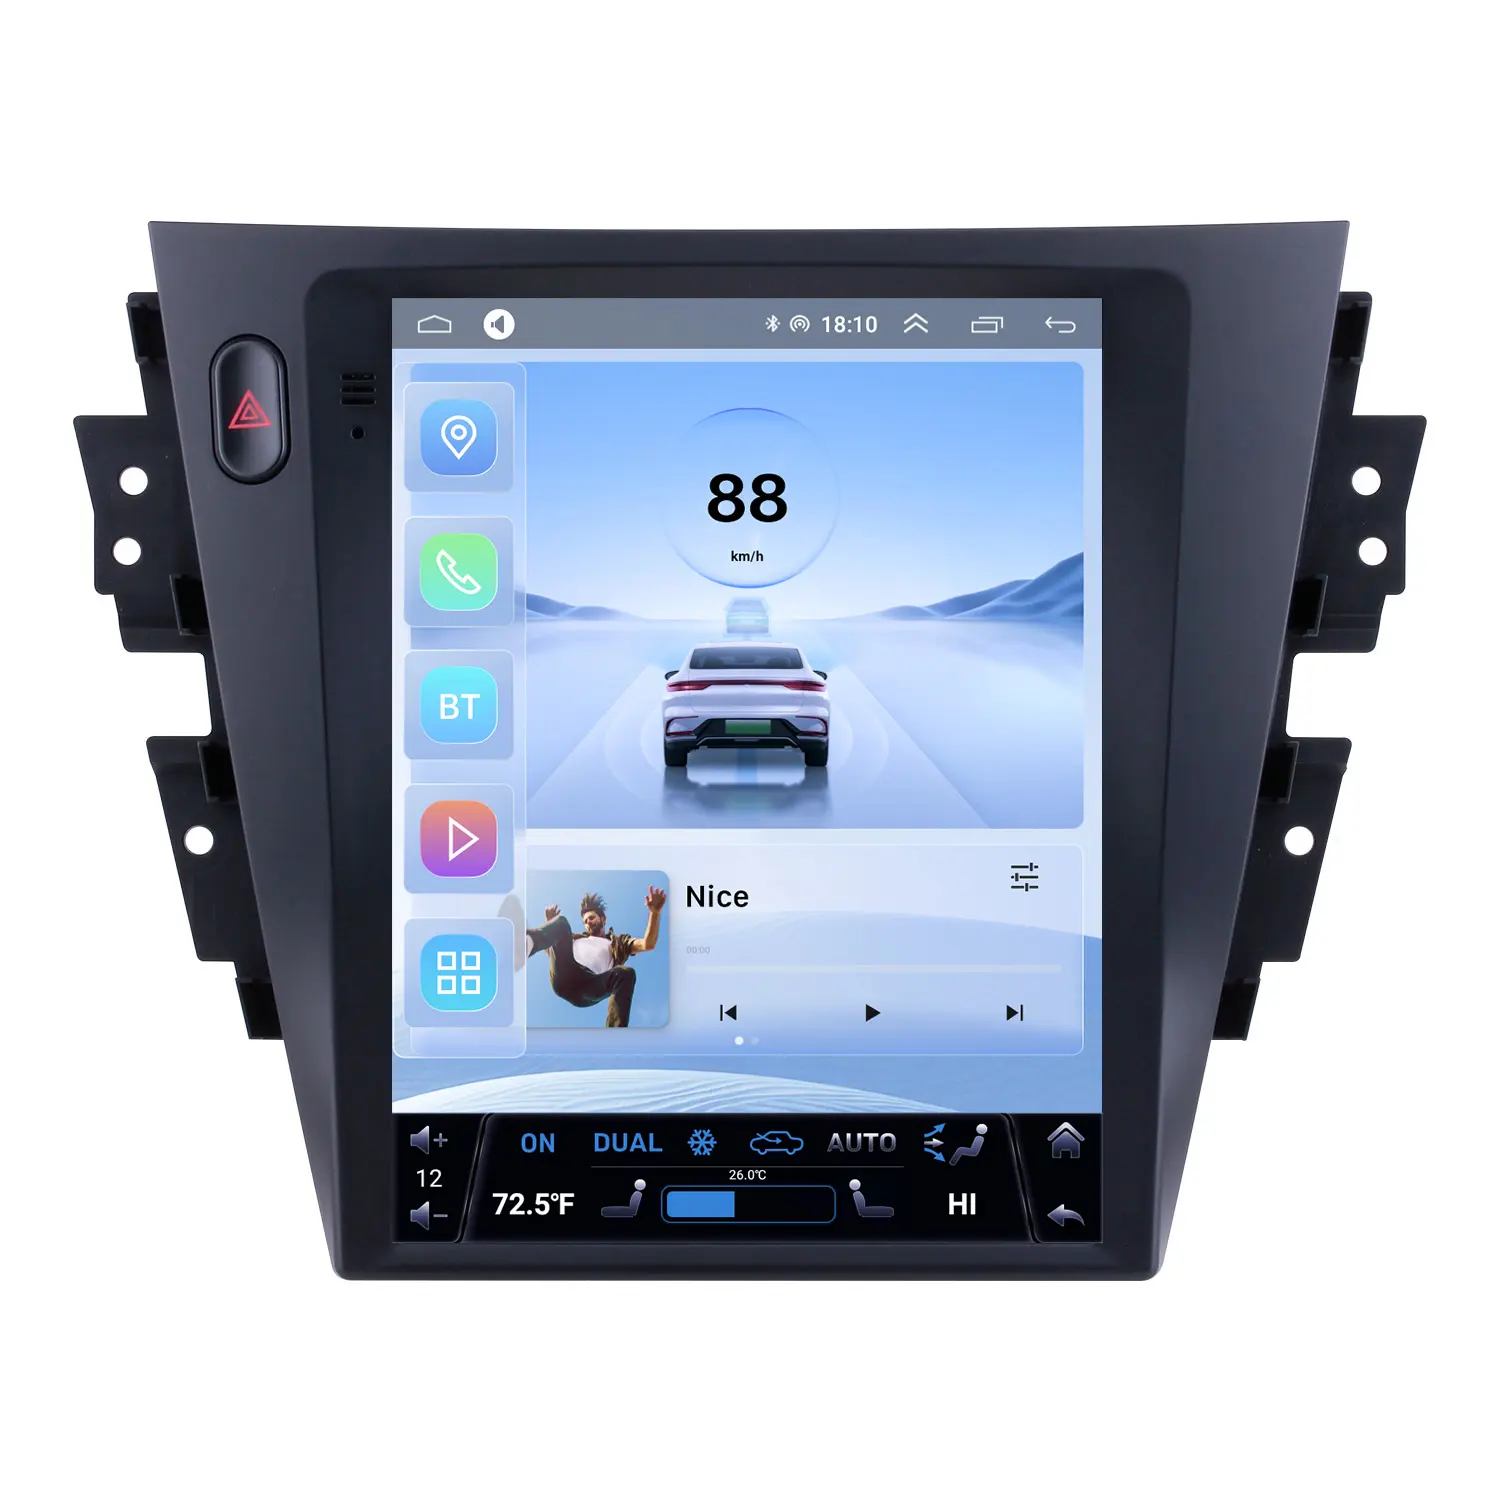 9.7 inch Car Radio Android 10.0 car stereo for 2016 SGMW S1 with Wifi Mirror Link carplay Rear camera GPS Navigation